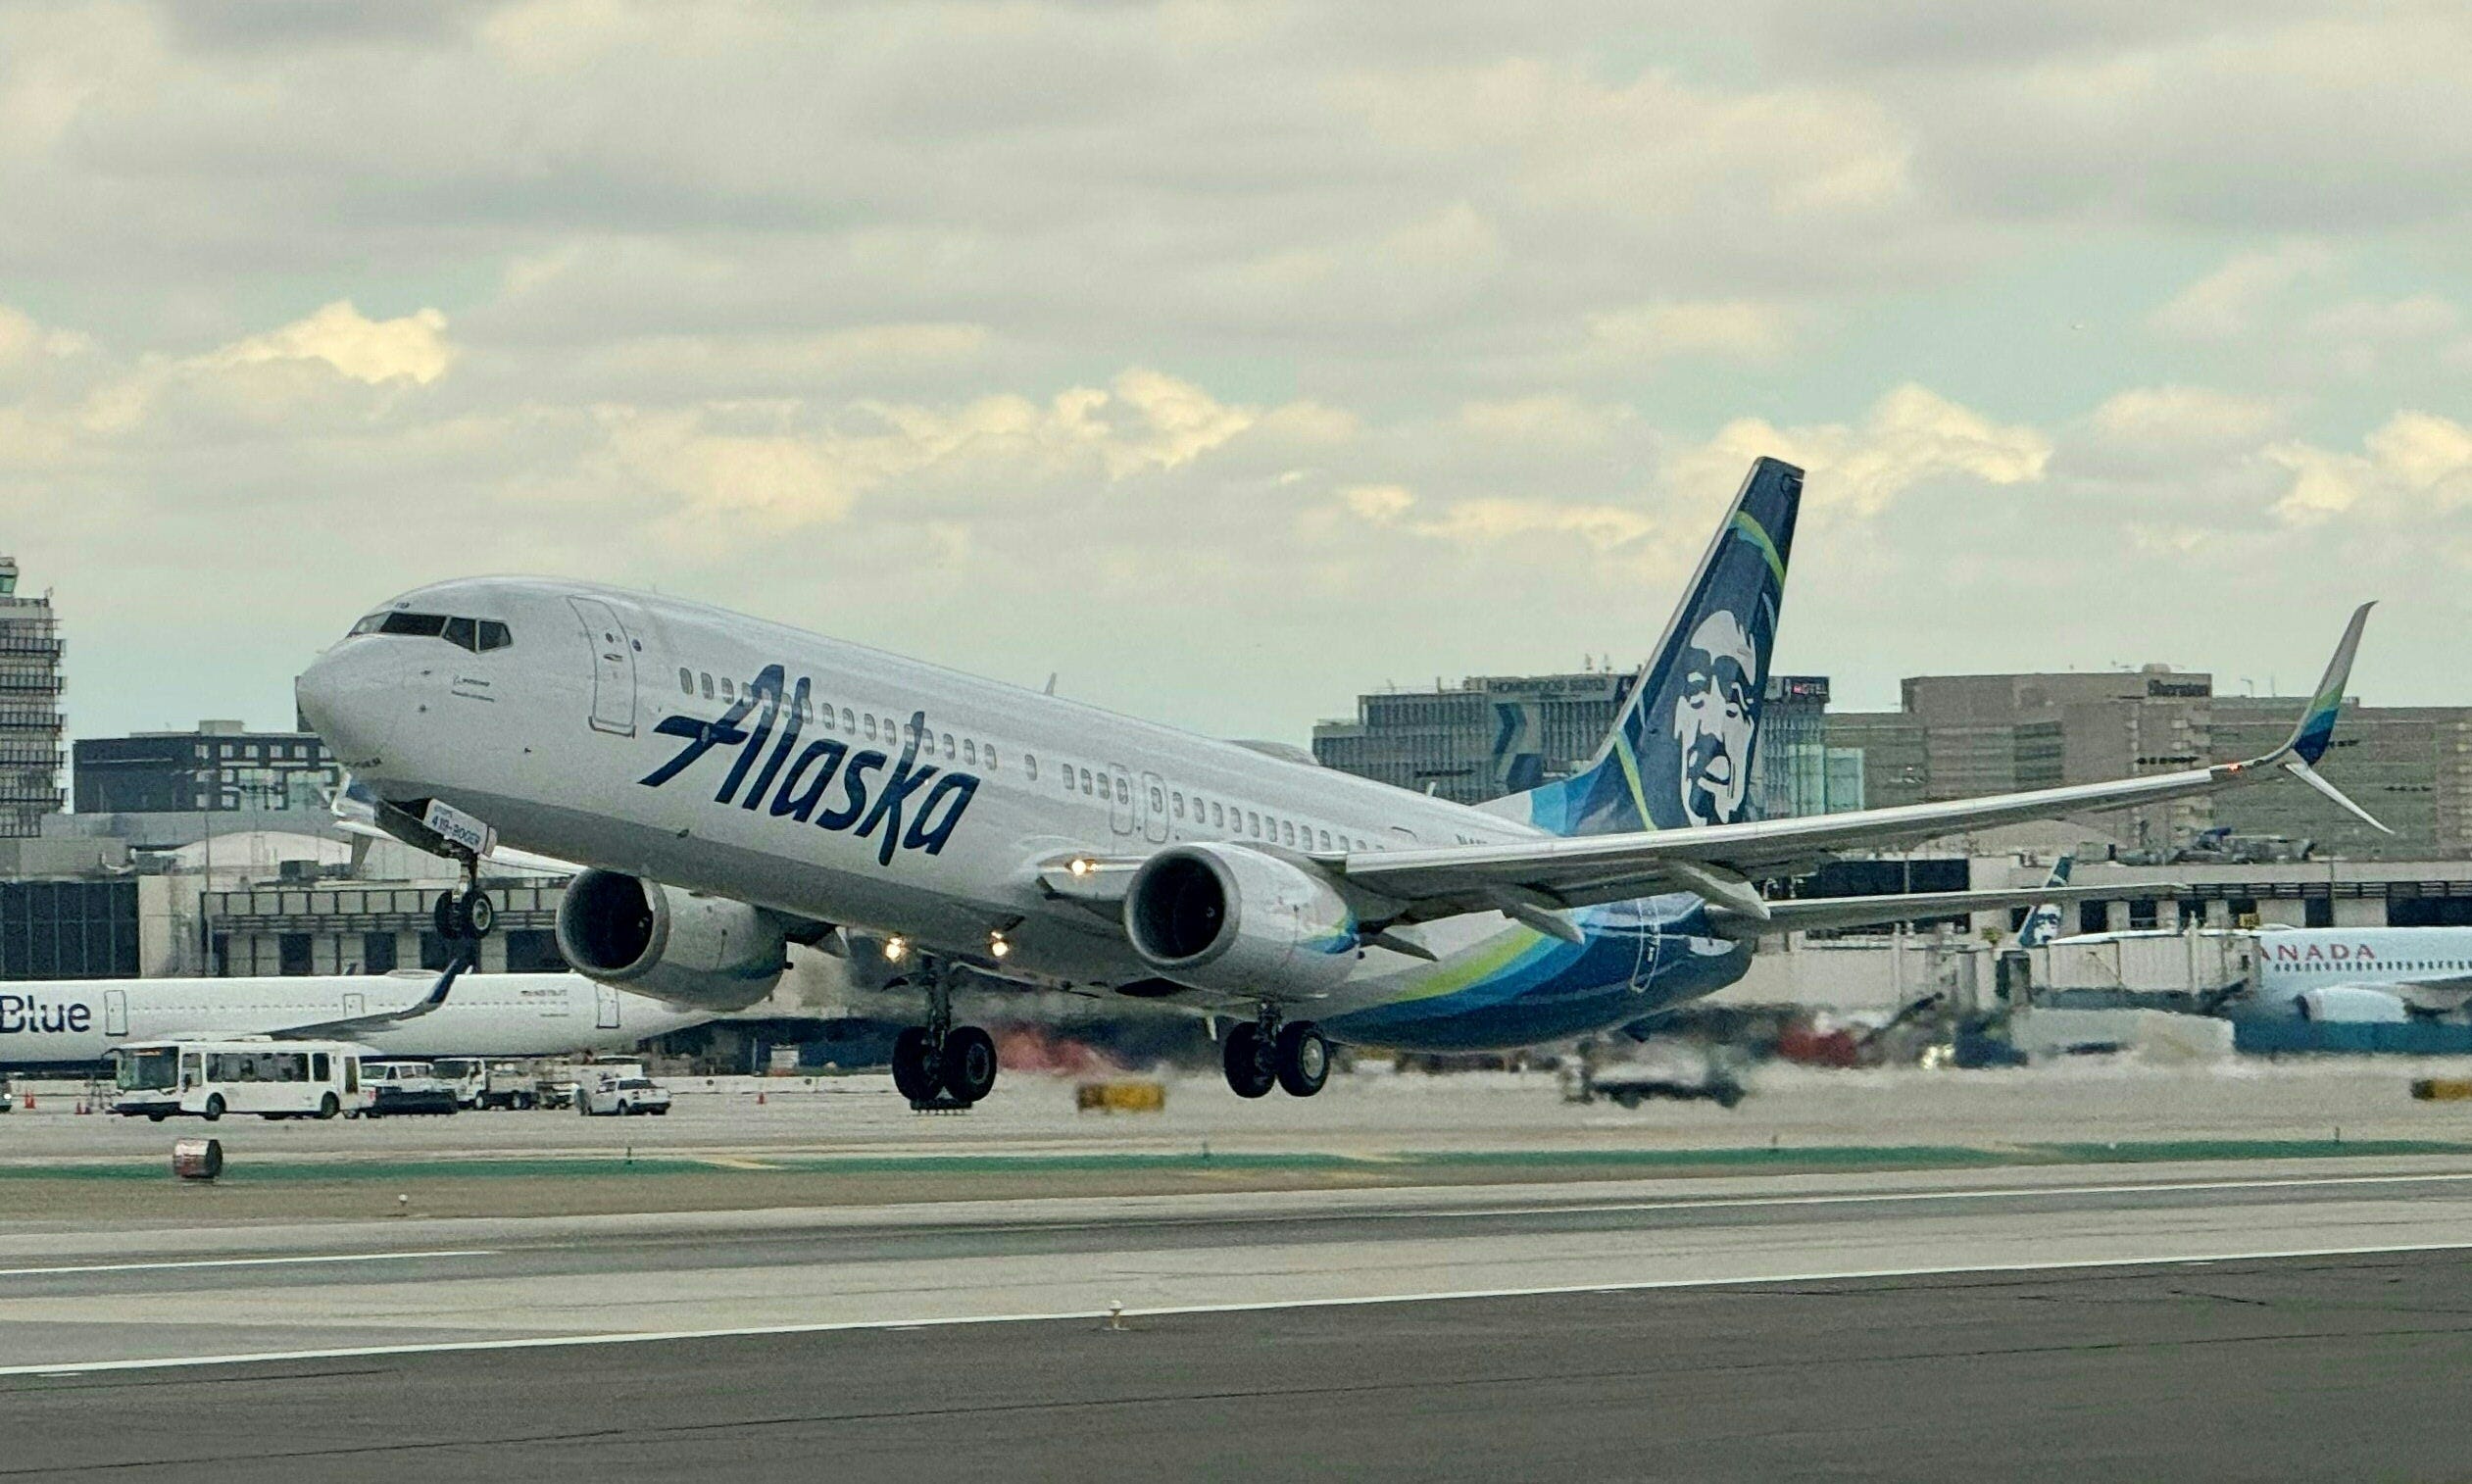 faa lifts ground stop of alaska airlines flights after system issues resolved